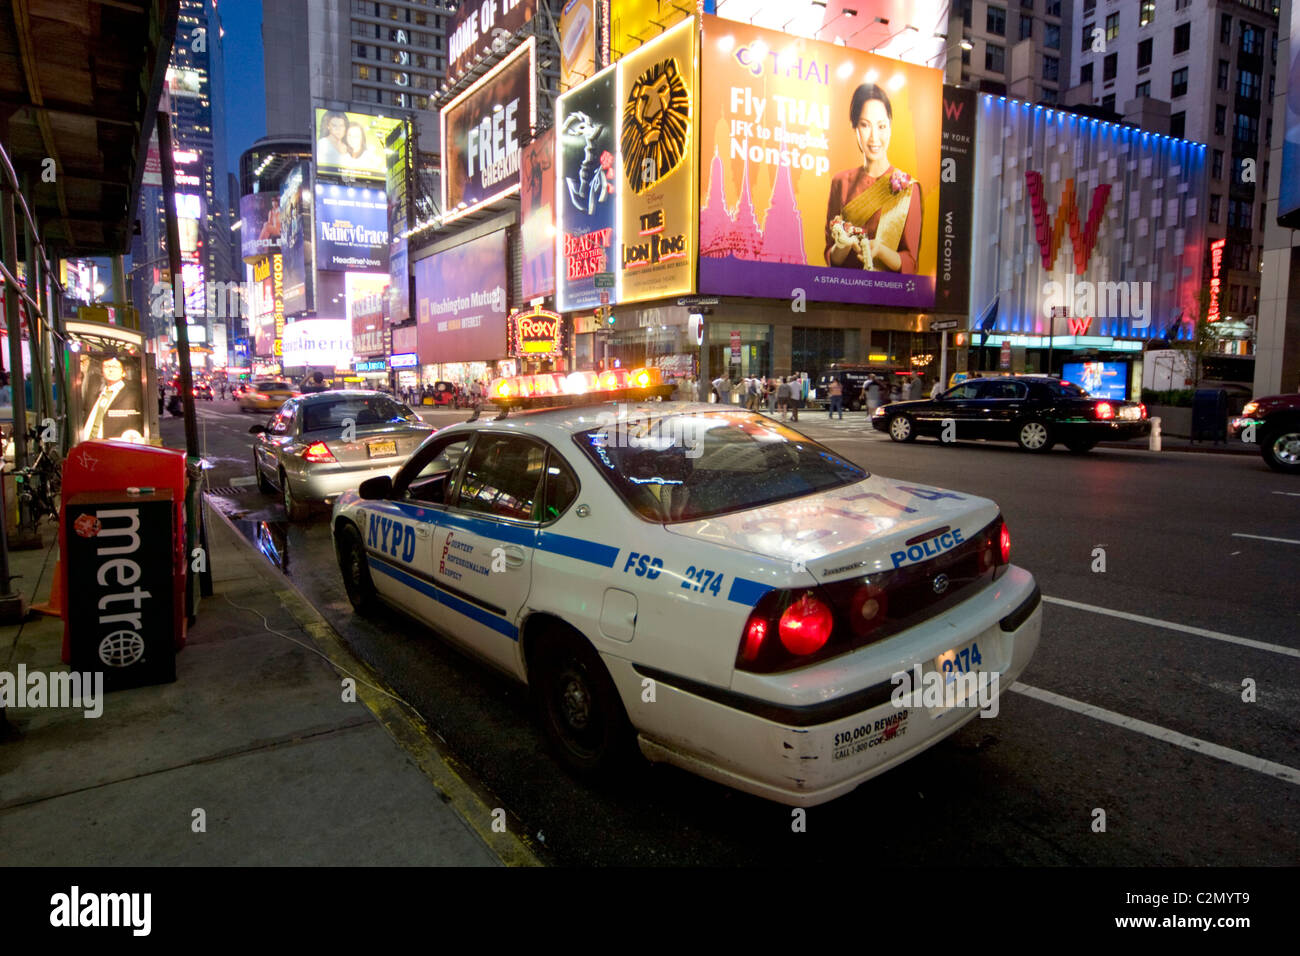 NYPD Police Times square New York Manhattan Stock Photo